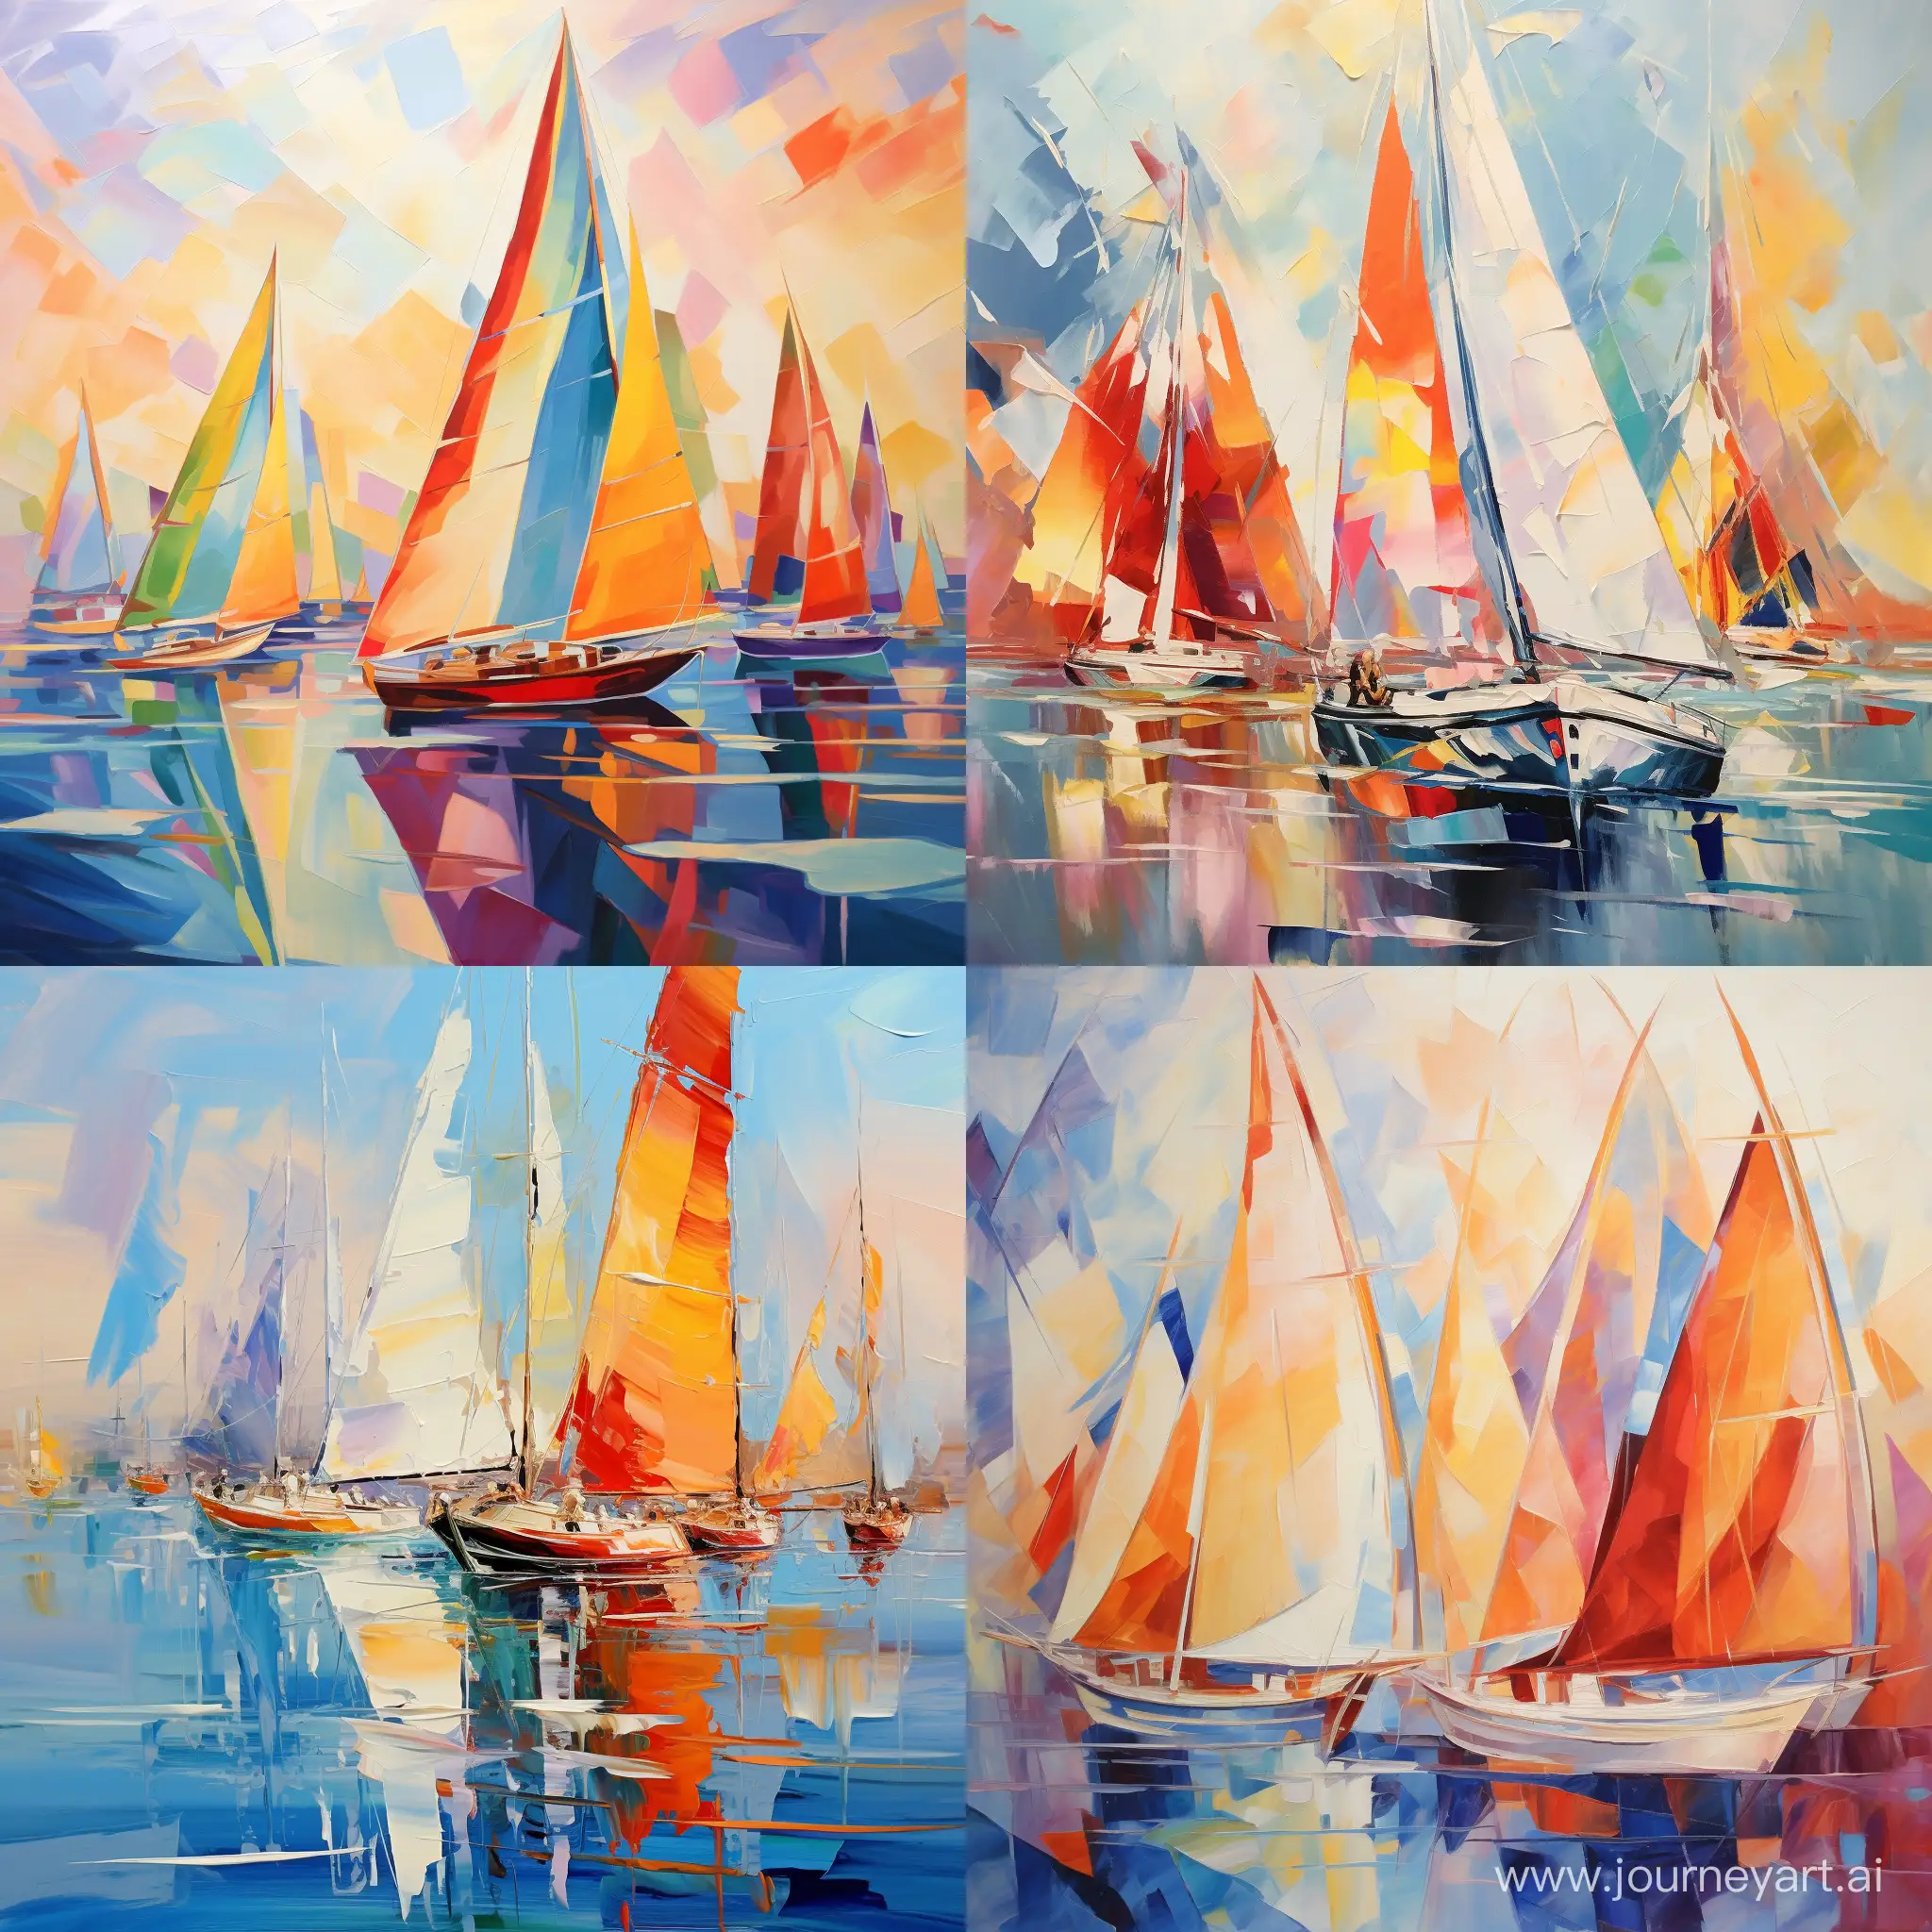 Abstract-Composition-of-Yachts-Regatta-in-Oil-Painting